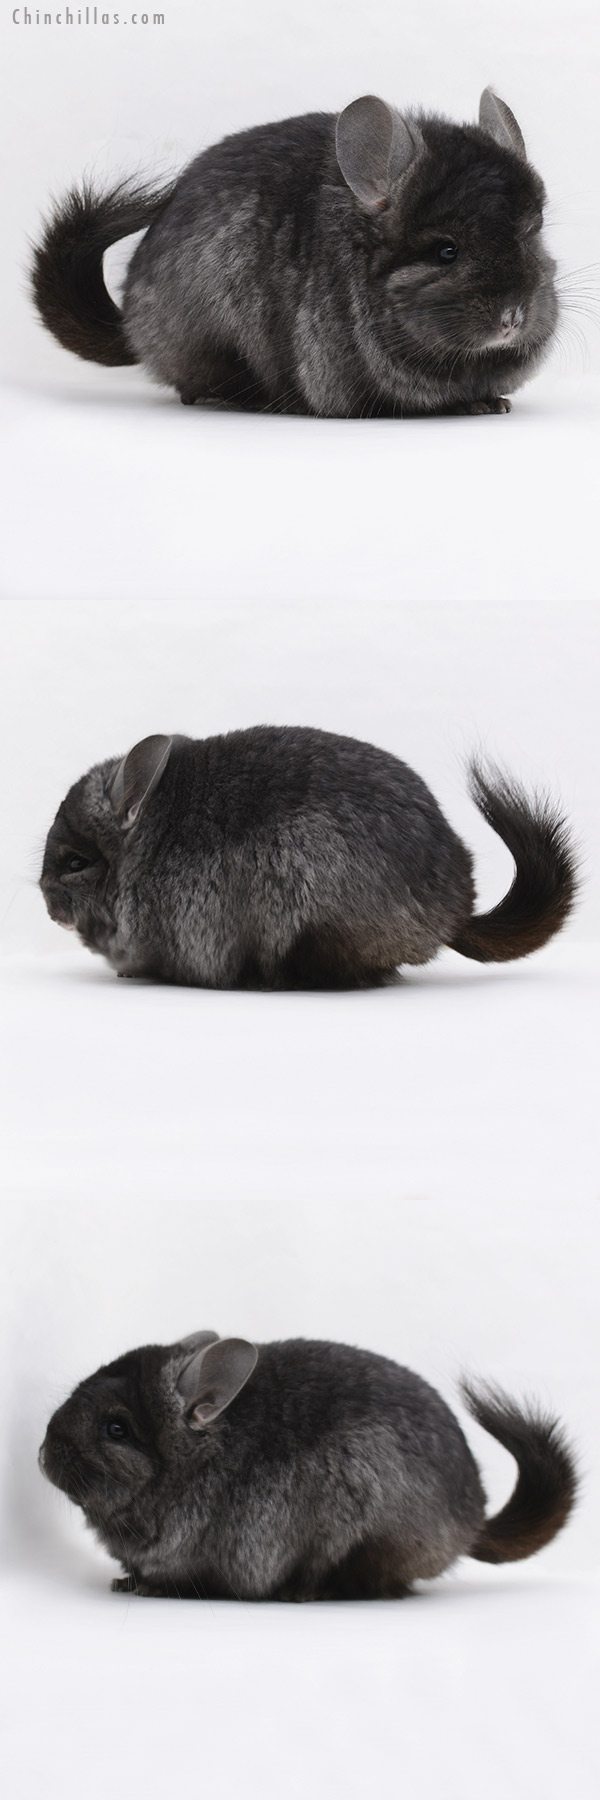 Chinchilla or related item offered for sale or export on Chinchillas.com - 20234 Ebony ( Locken Carrier )  Royal Persian Angora Male Chinchilla